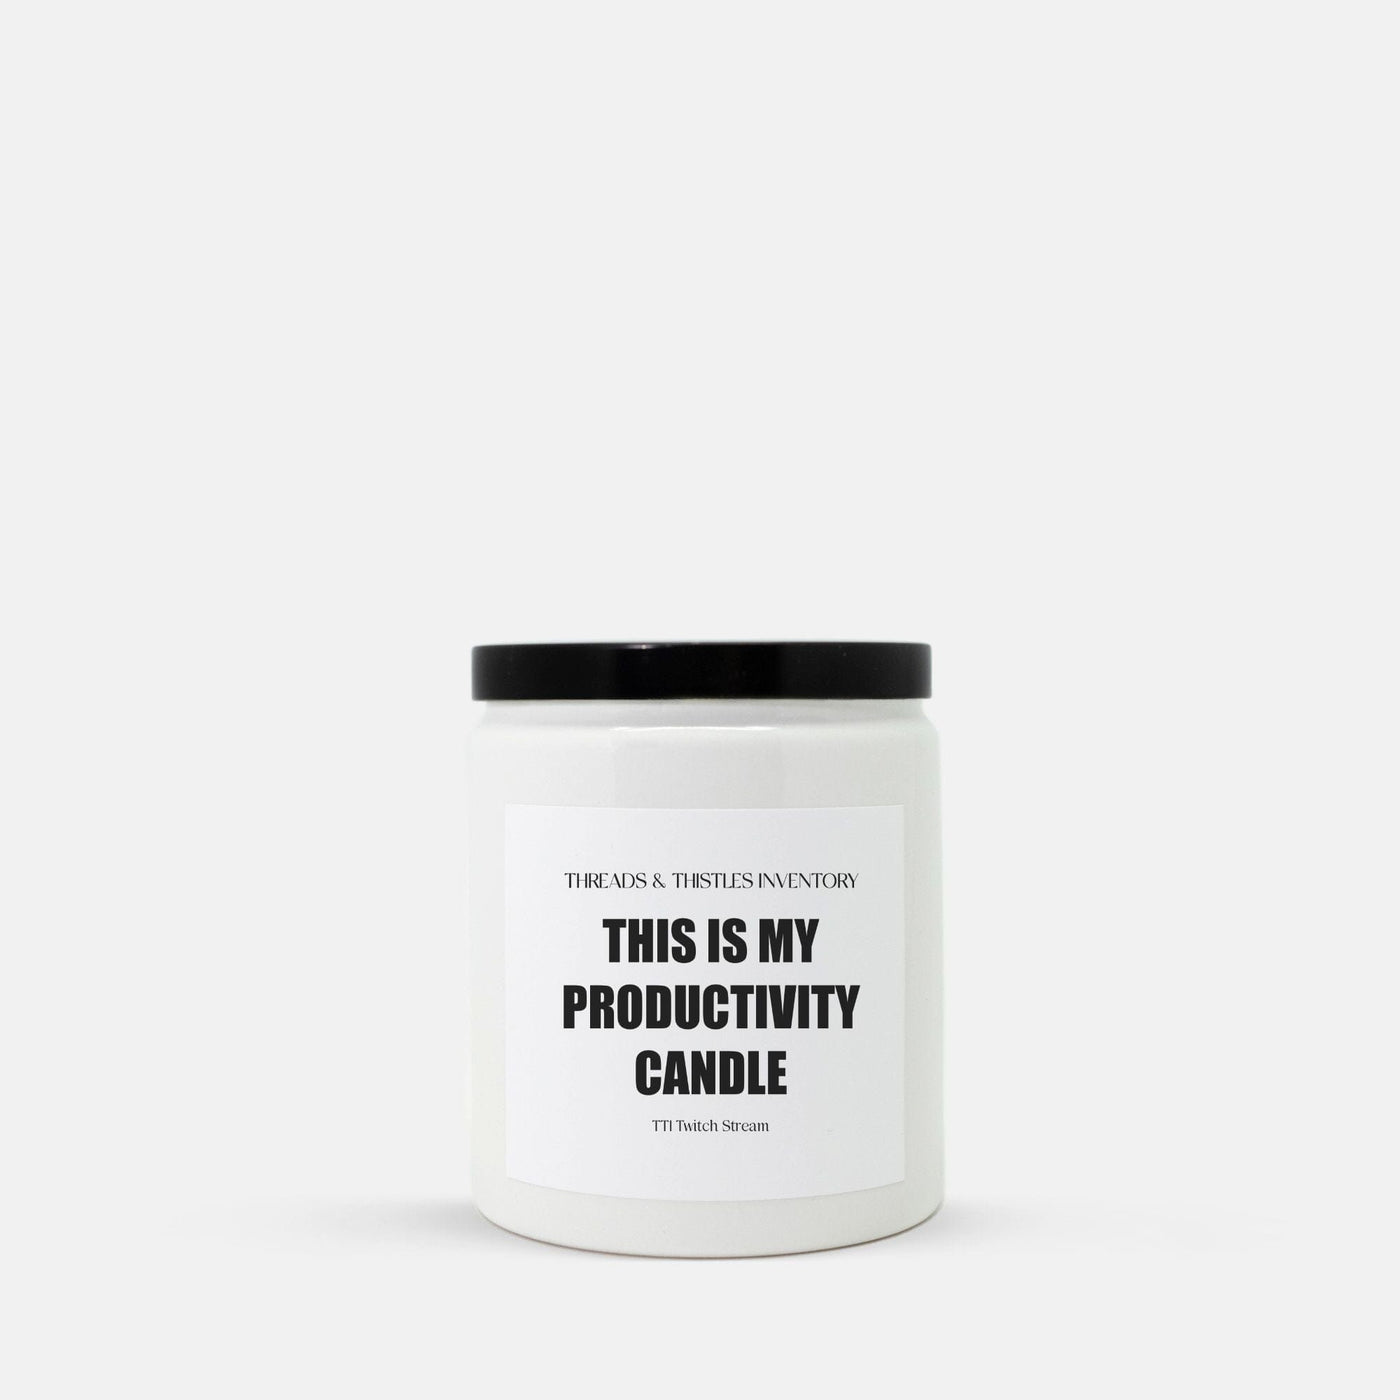 Productivity Candle | Candle Ceramic 8oz | TTI Stream Candles Threads & Thistles Inventory Black Honeydew Melon 